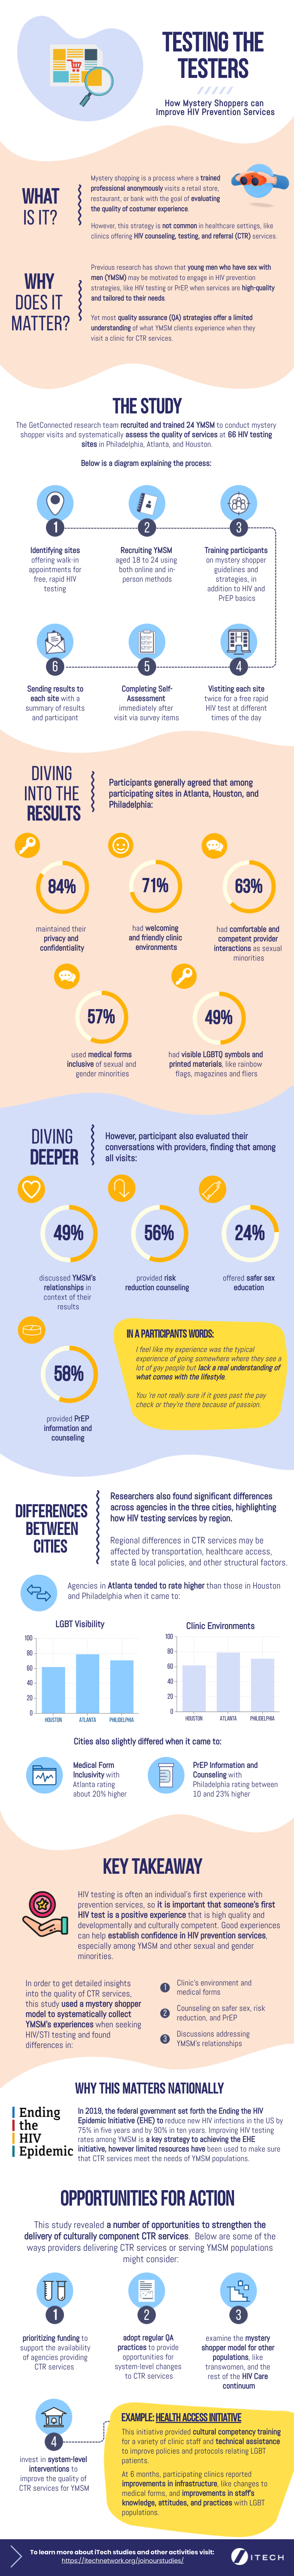 Get Connected Mystery Shopping Infographic